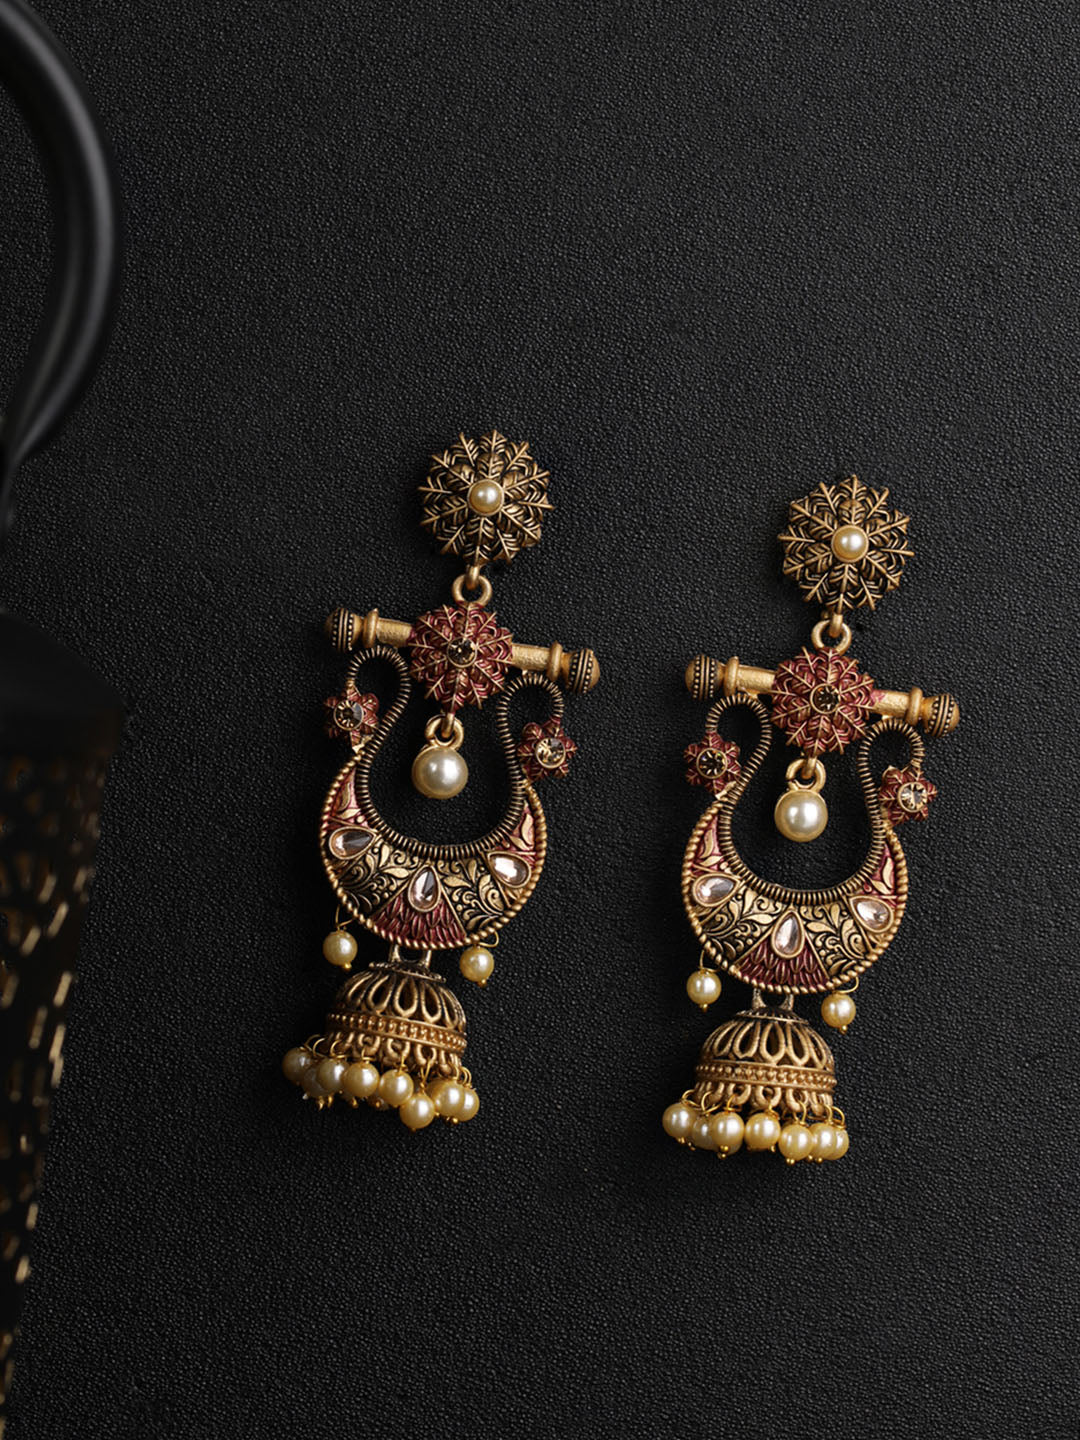 Stunning Peacock Design Gold Earring Forming Collection ER2141